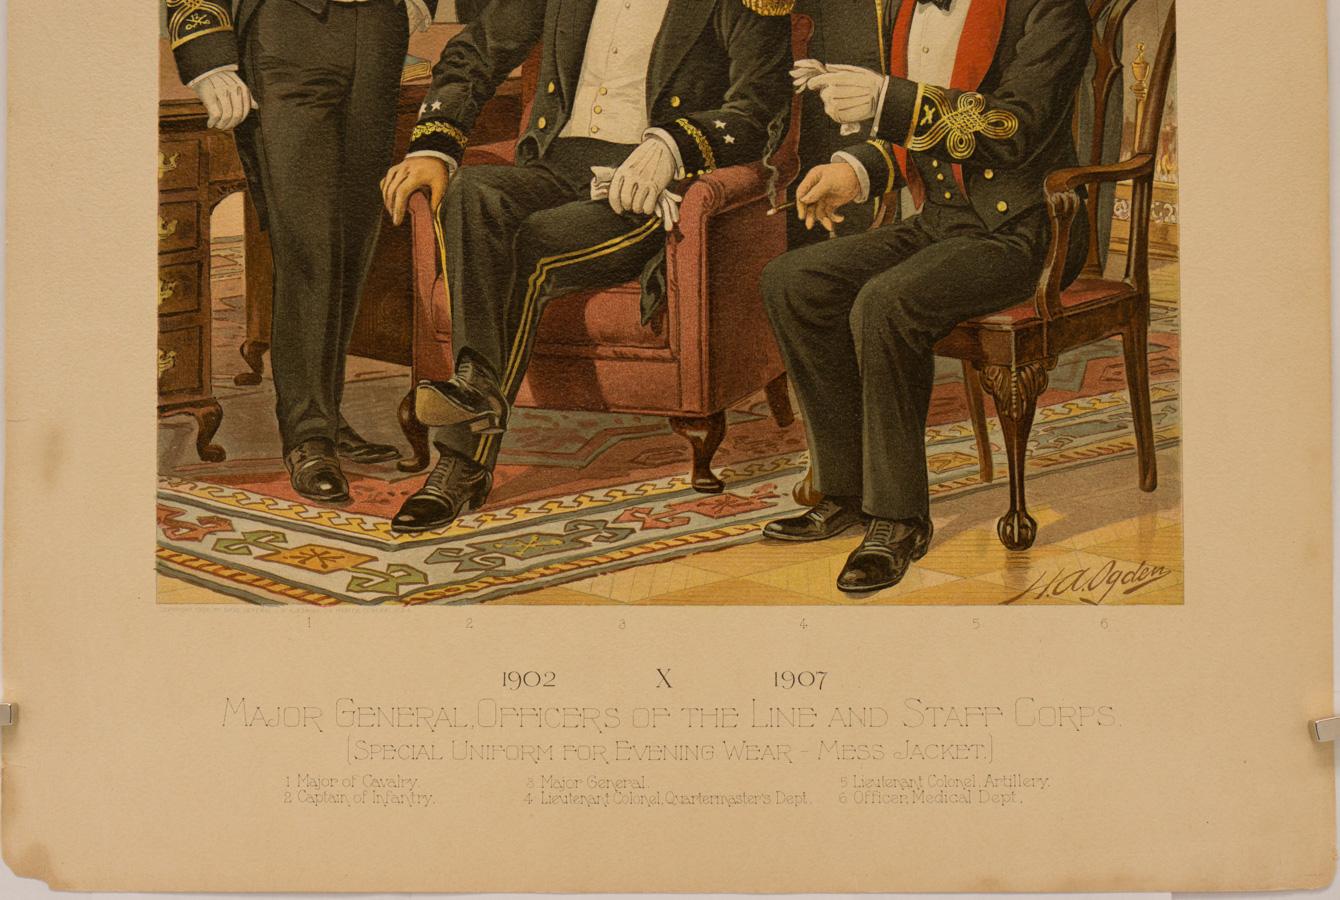 Major General, Officers of the Line &Staff Corps Special Uniform for Evening - Print by Henry A. Ogden